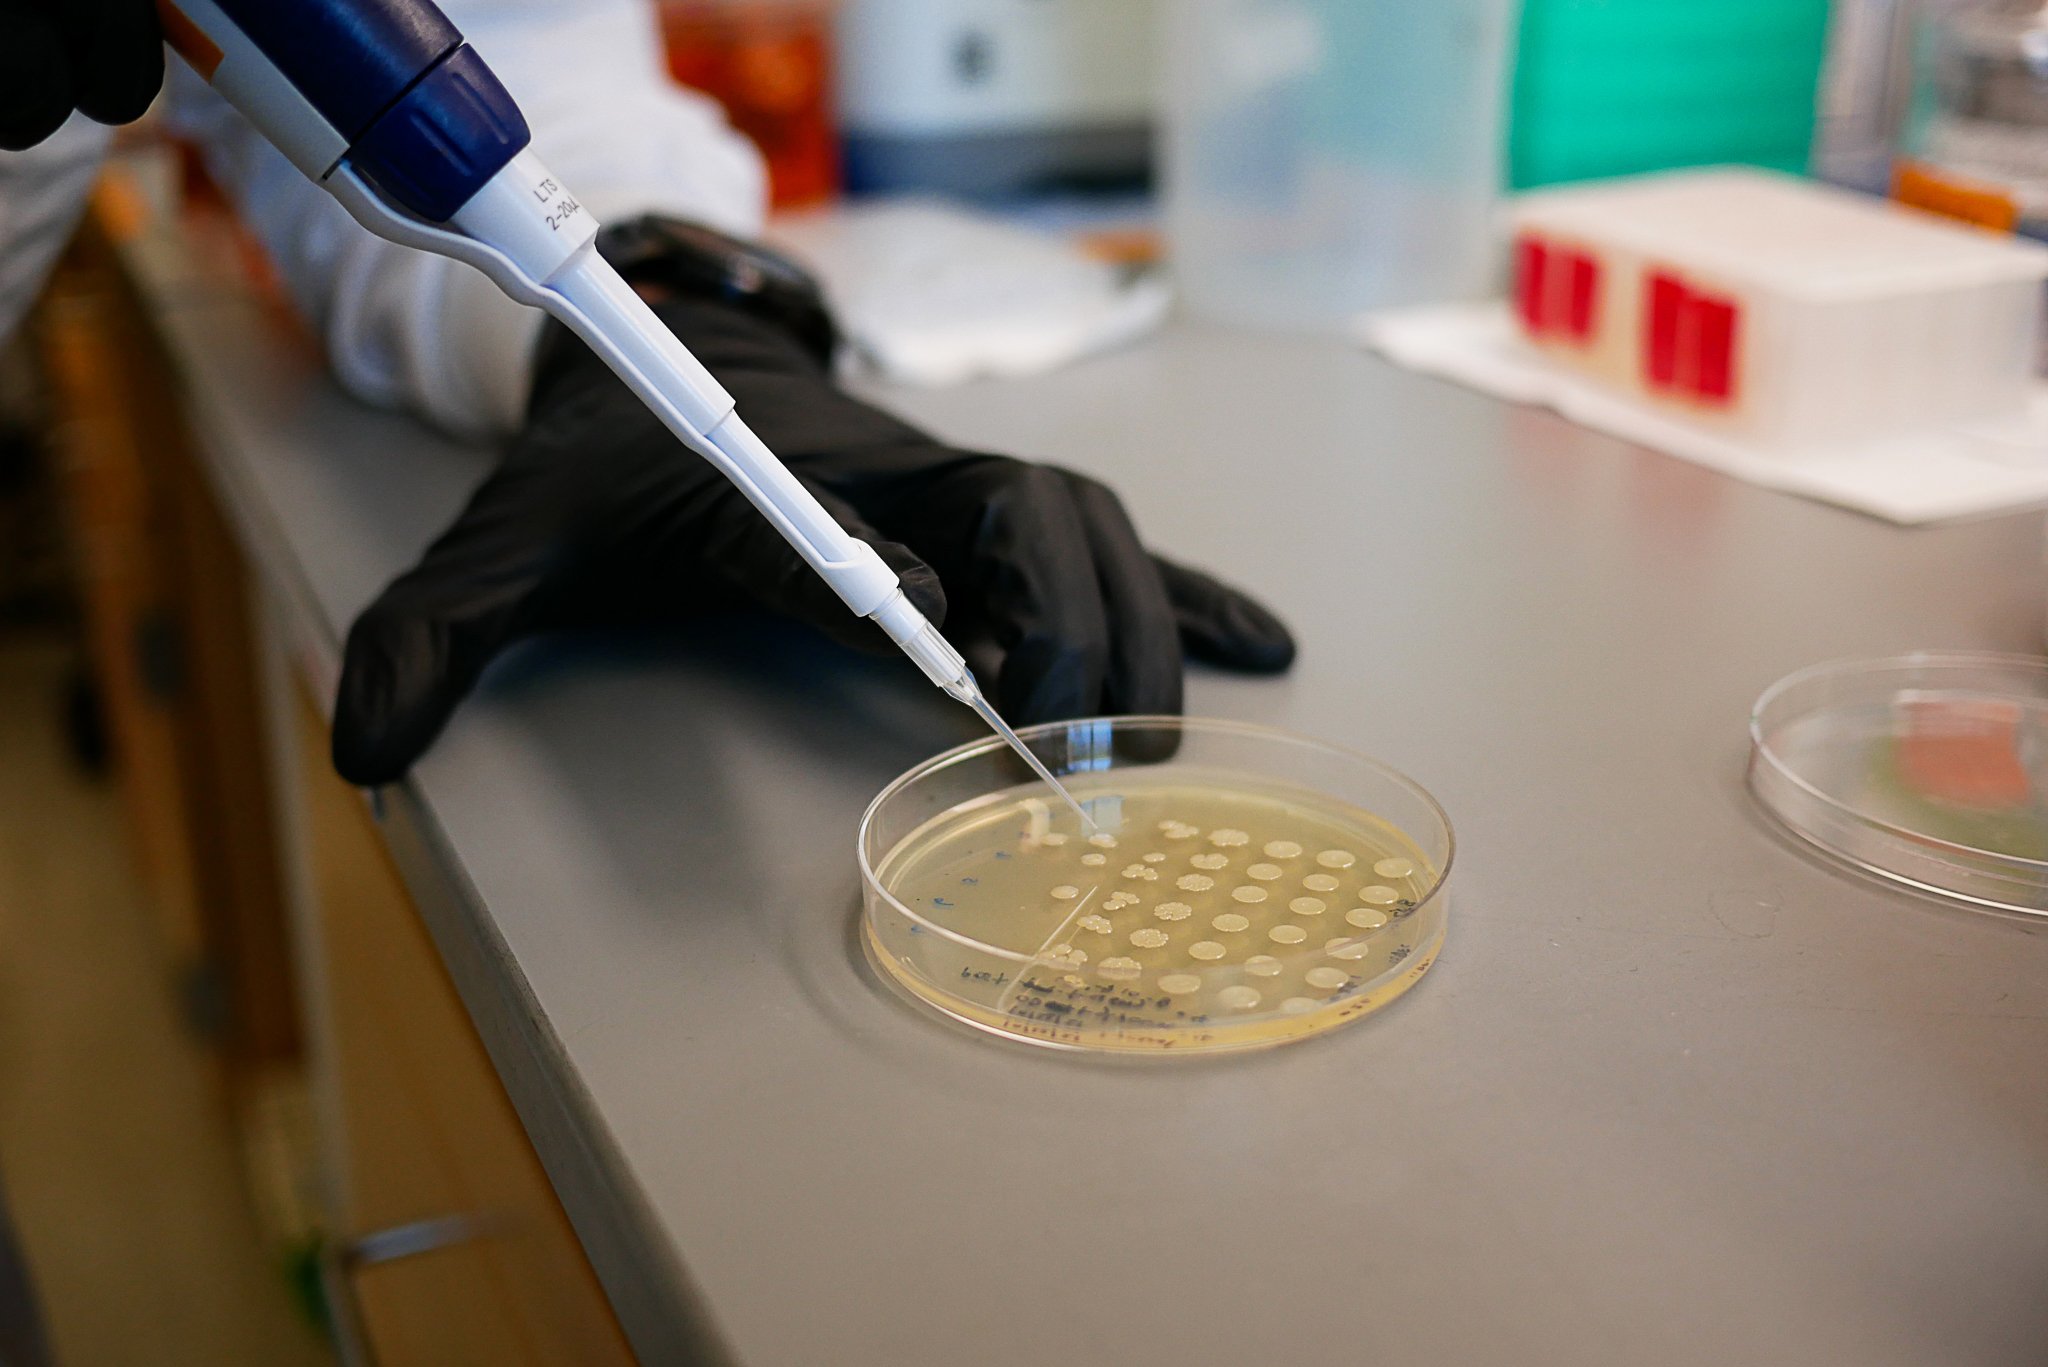 An IGI researcher plates bacterial cultures in the Innovative Genomics Institutes BIOME lab where researchers study how to 